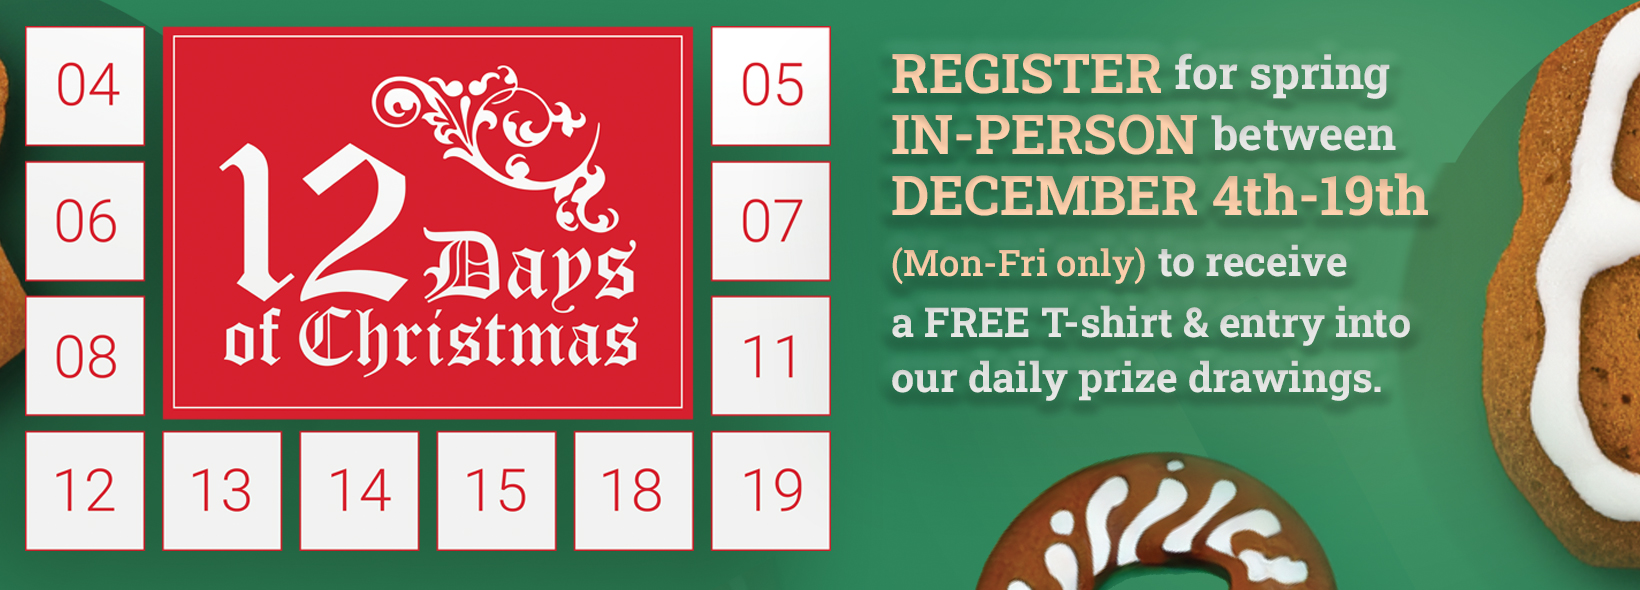 12 Days of Christmas Spring course enrollment